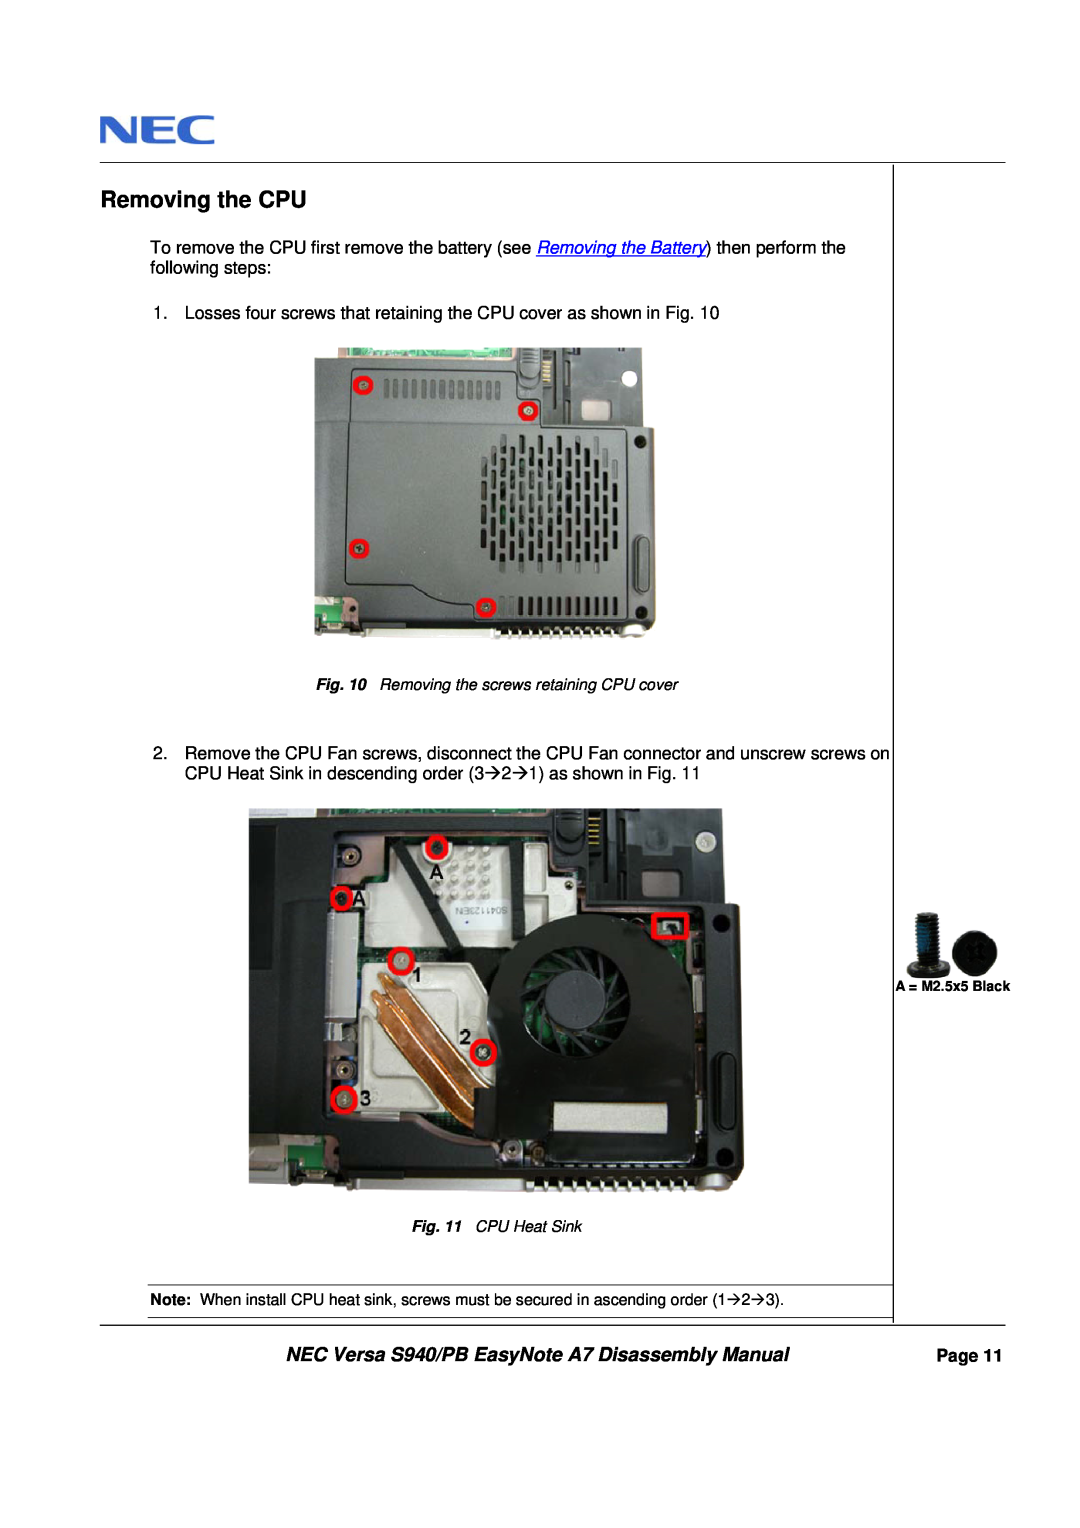 Packard Bell manual Removing the CPU, NEC Versa S940/PB EasyNote A7 Disassembly Manual 